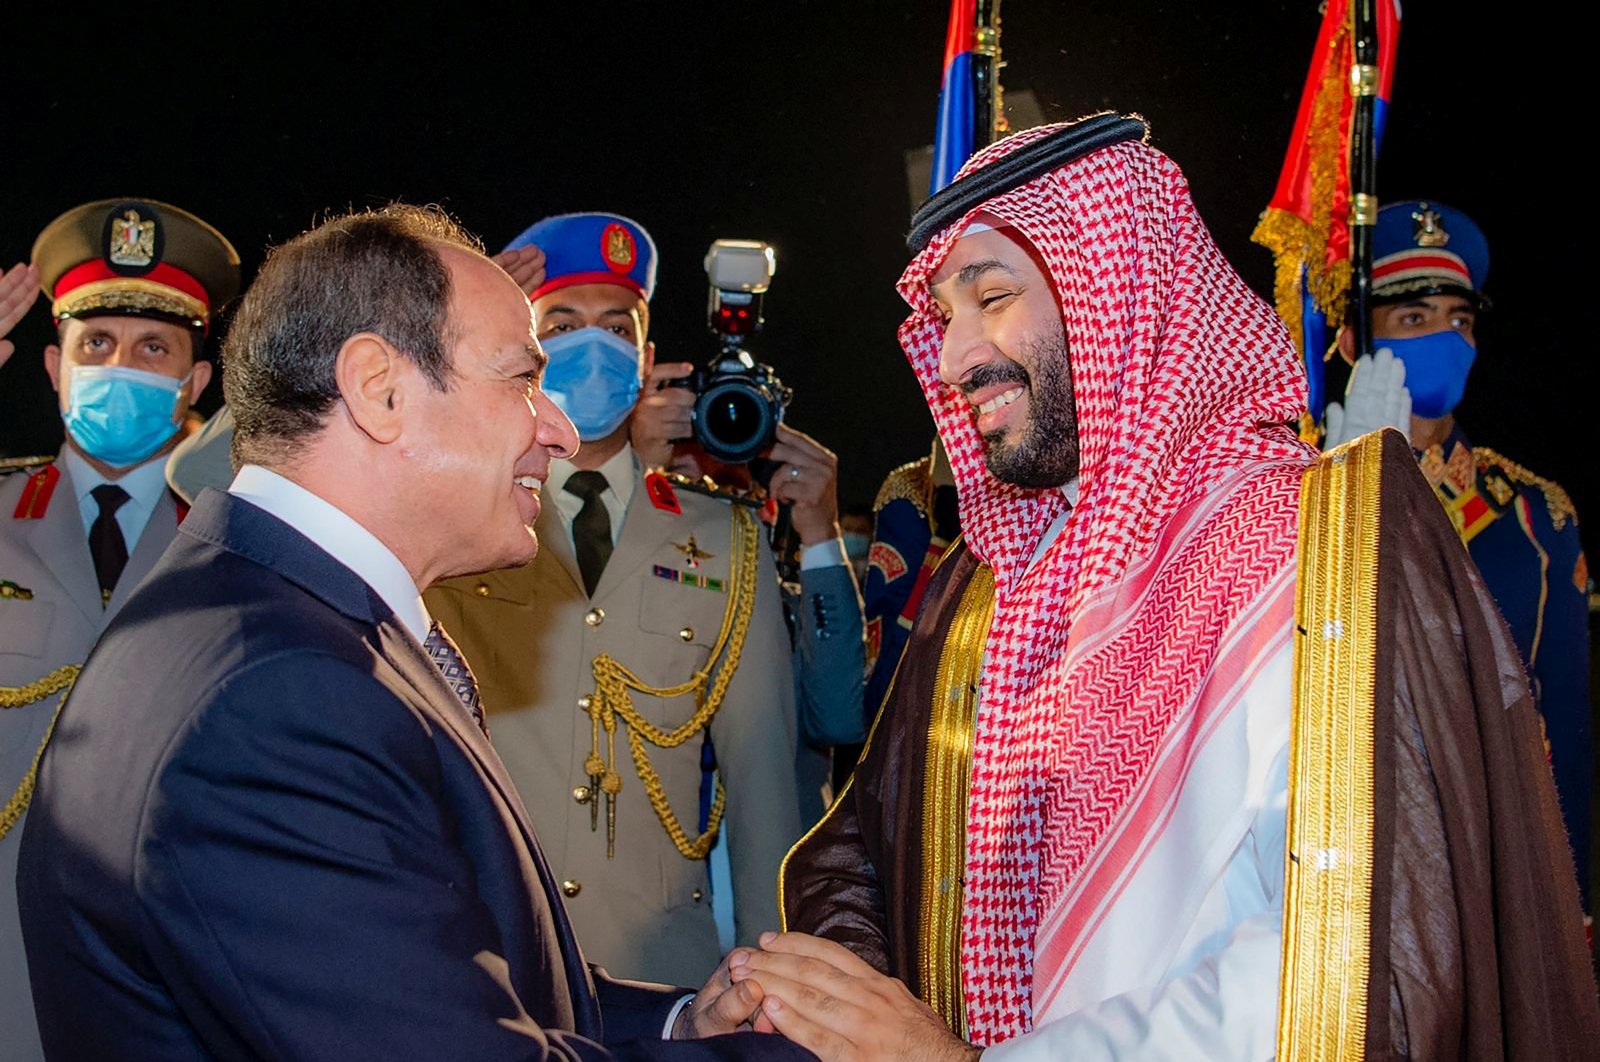 Saudi Crown Prince Mohammed bin Salman is received by Egyptian President Abdel-Fattah el-Sissi upon his arrival in Cairo, Egypt, June 20, 2022. (Saudi Press Agency/Handout via REUTERS)